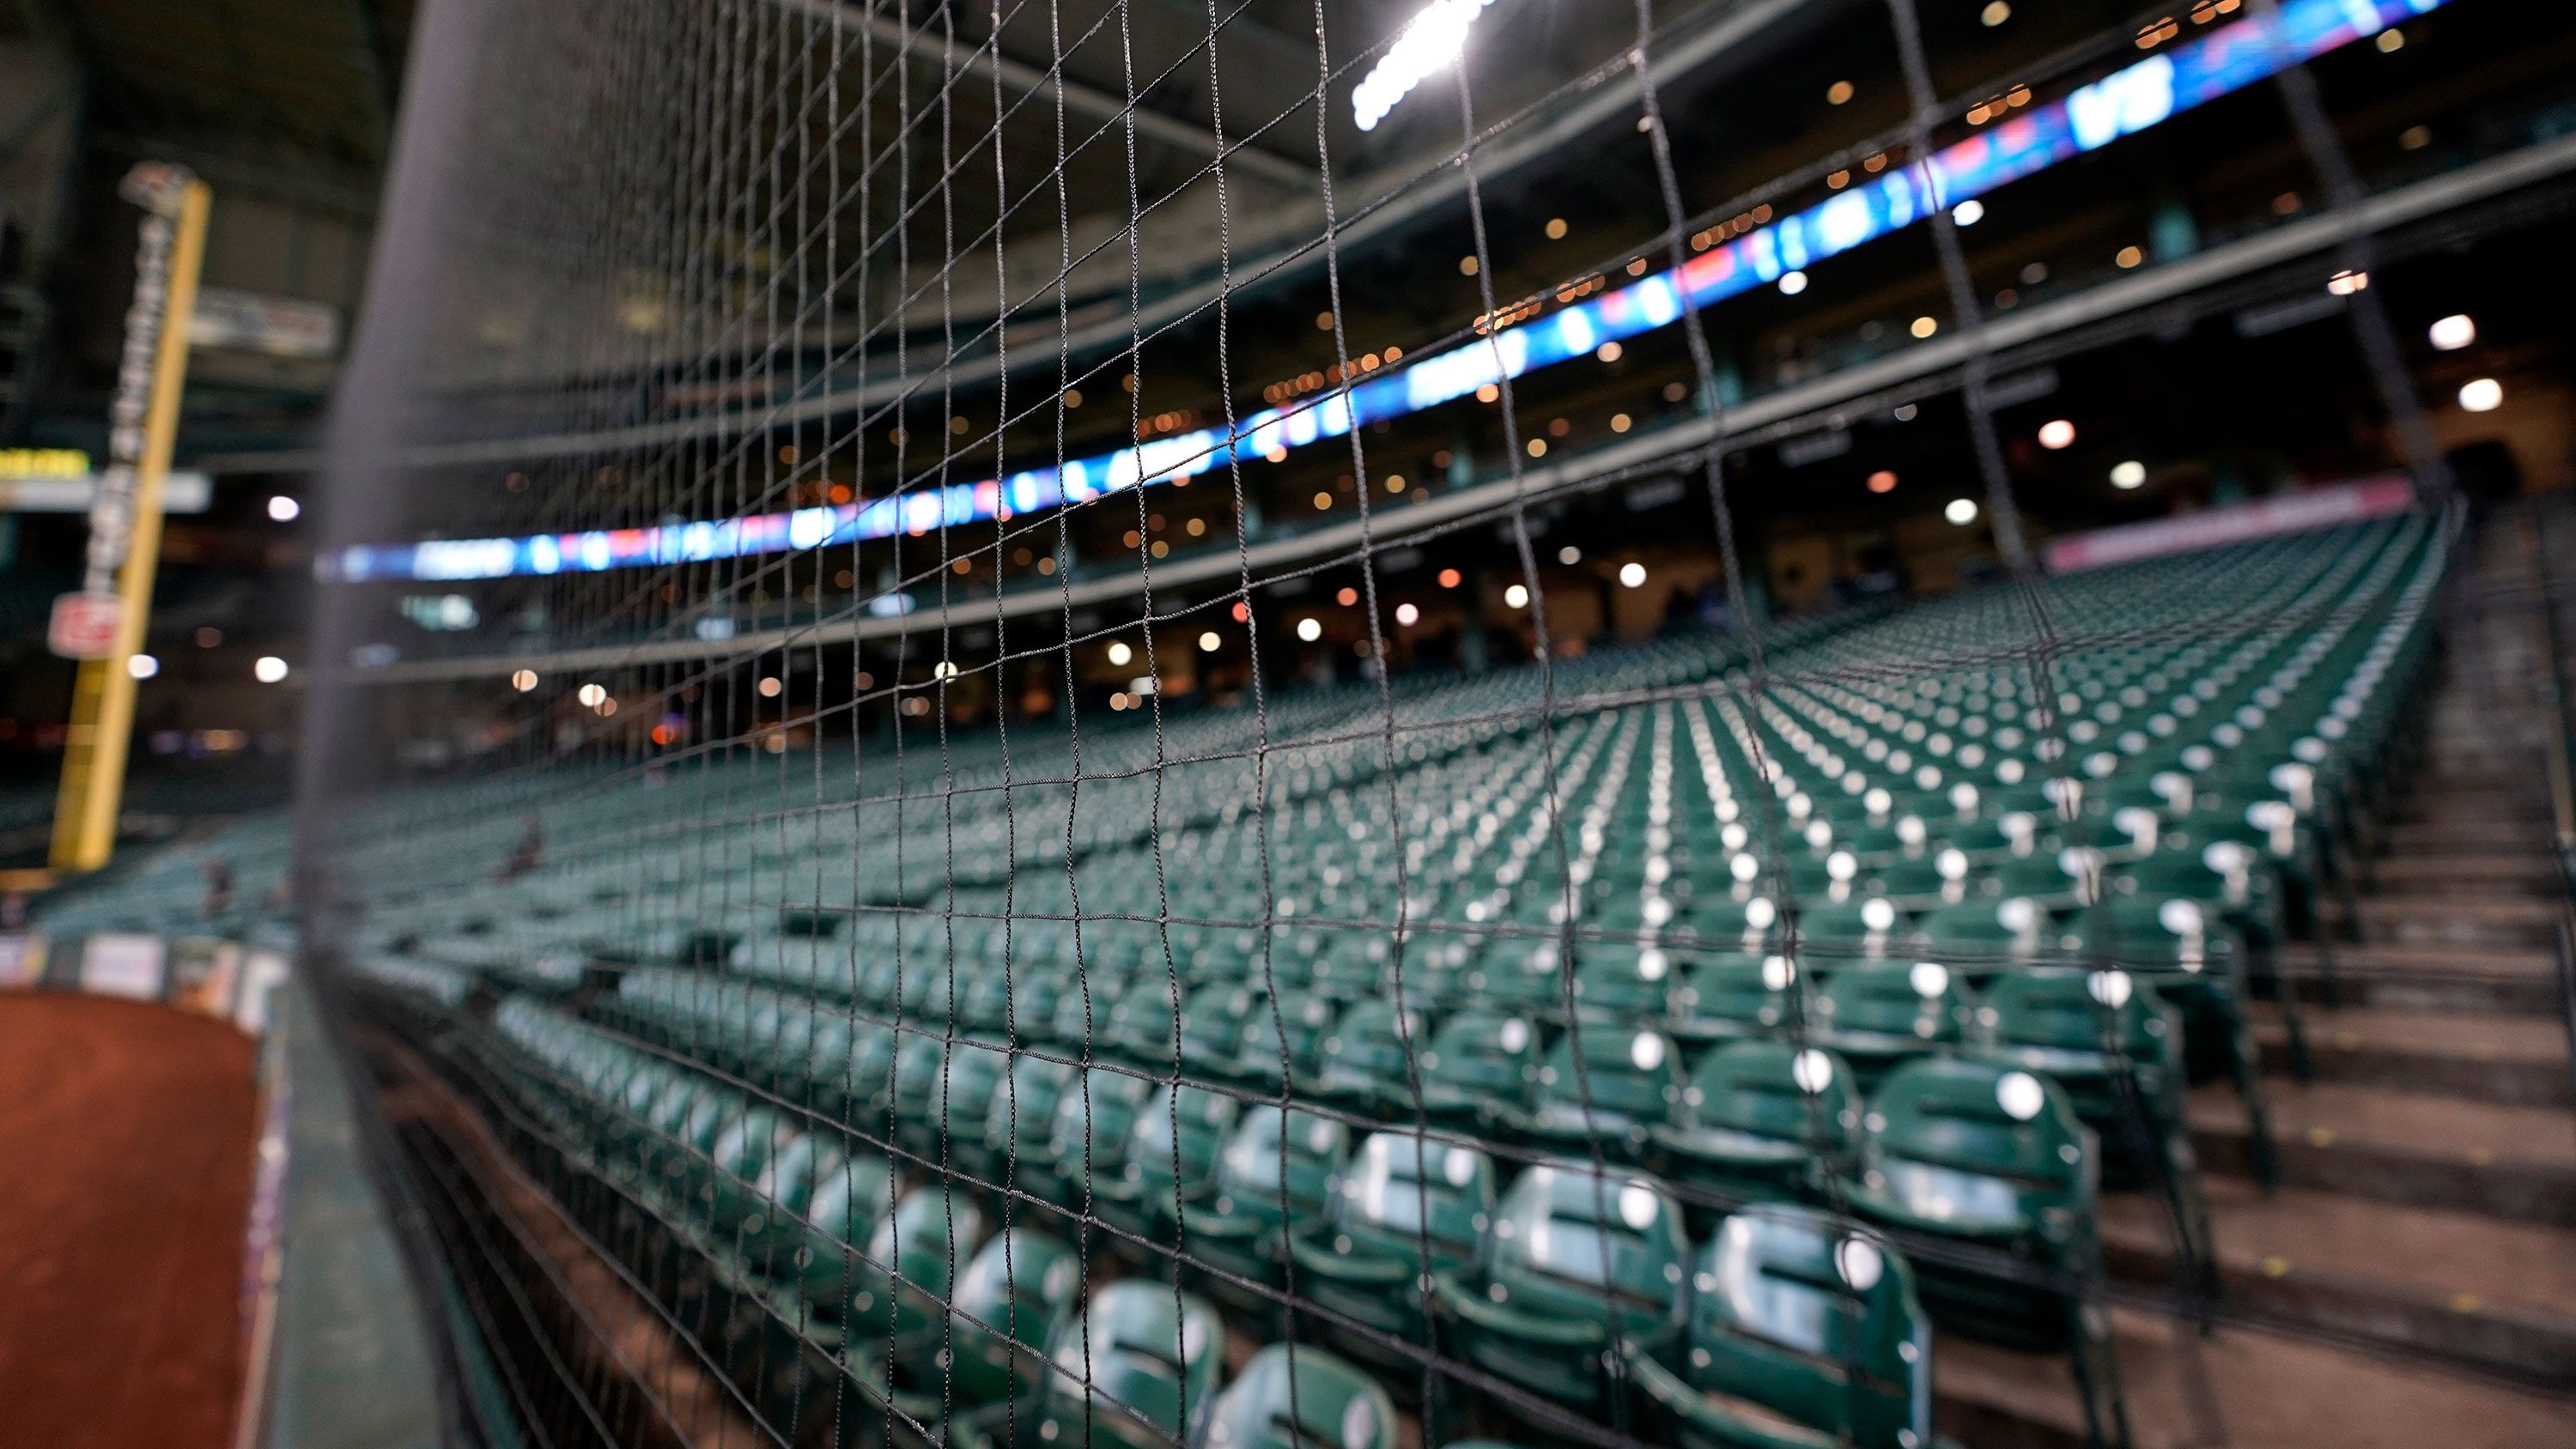 Look: Minute Maid Park outfield conditions unacceptable for baseball